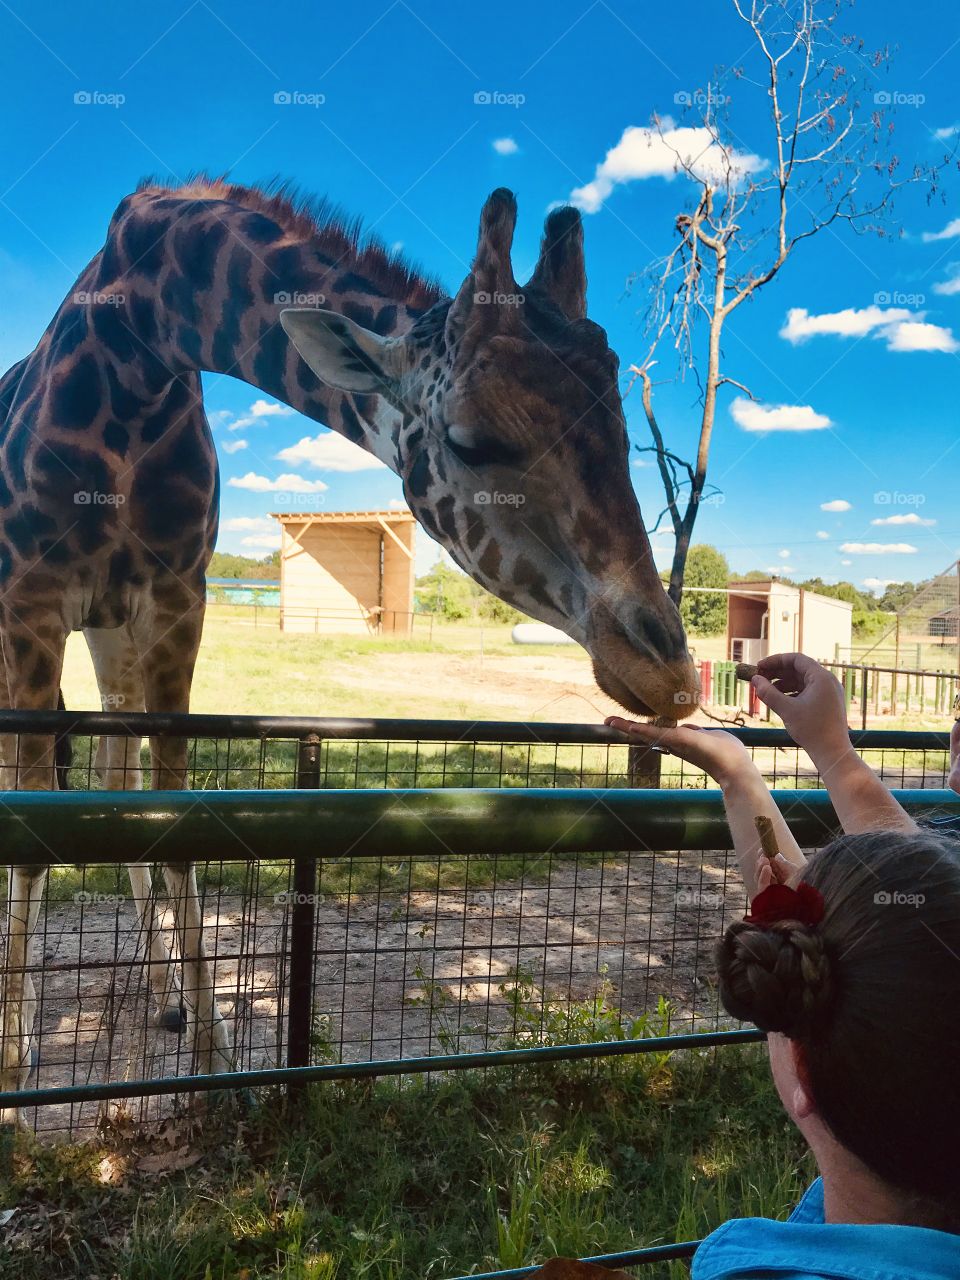 Gorgeous photo of beautiful giraffe eating right out of our hands at animal park!!